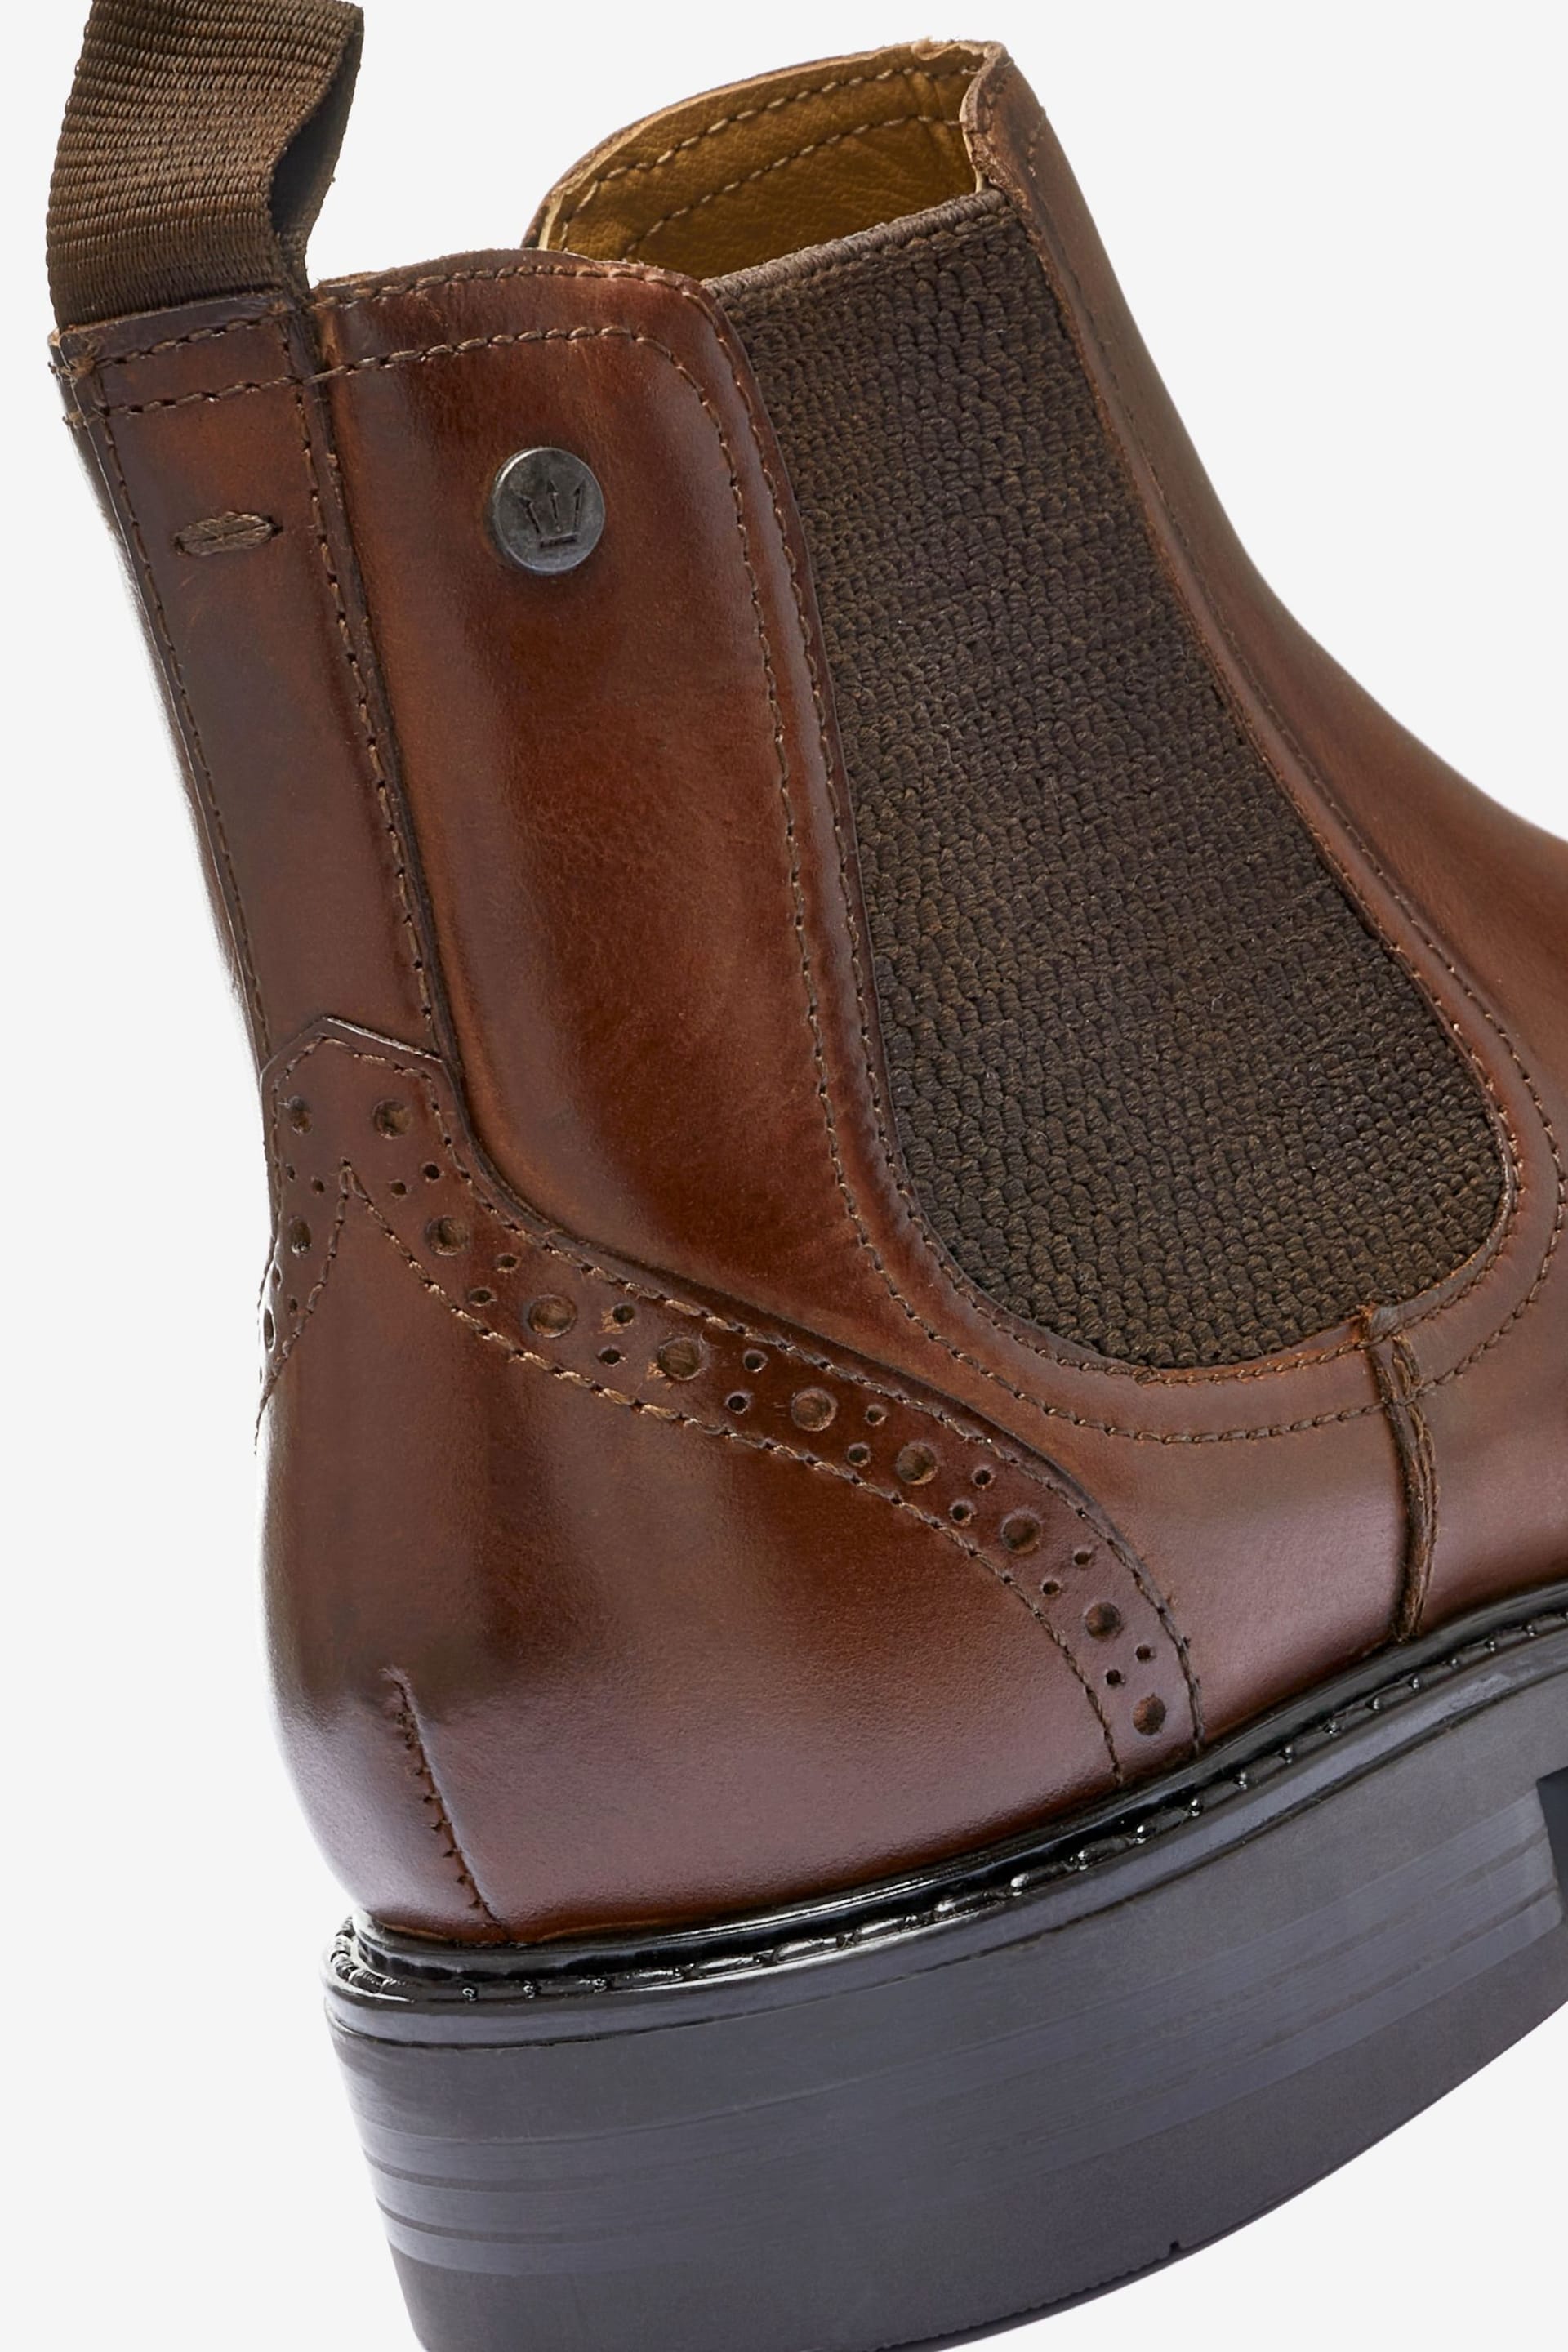 Brown Cleated Chelsea Boots - Image 3 of 3